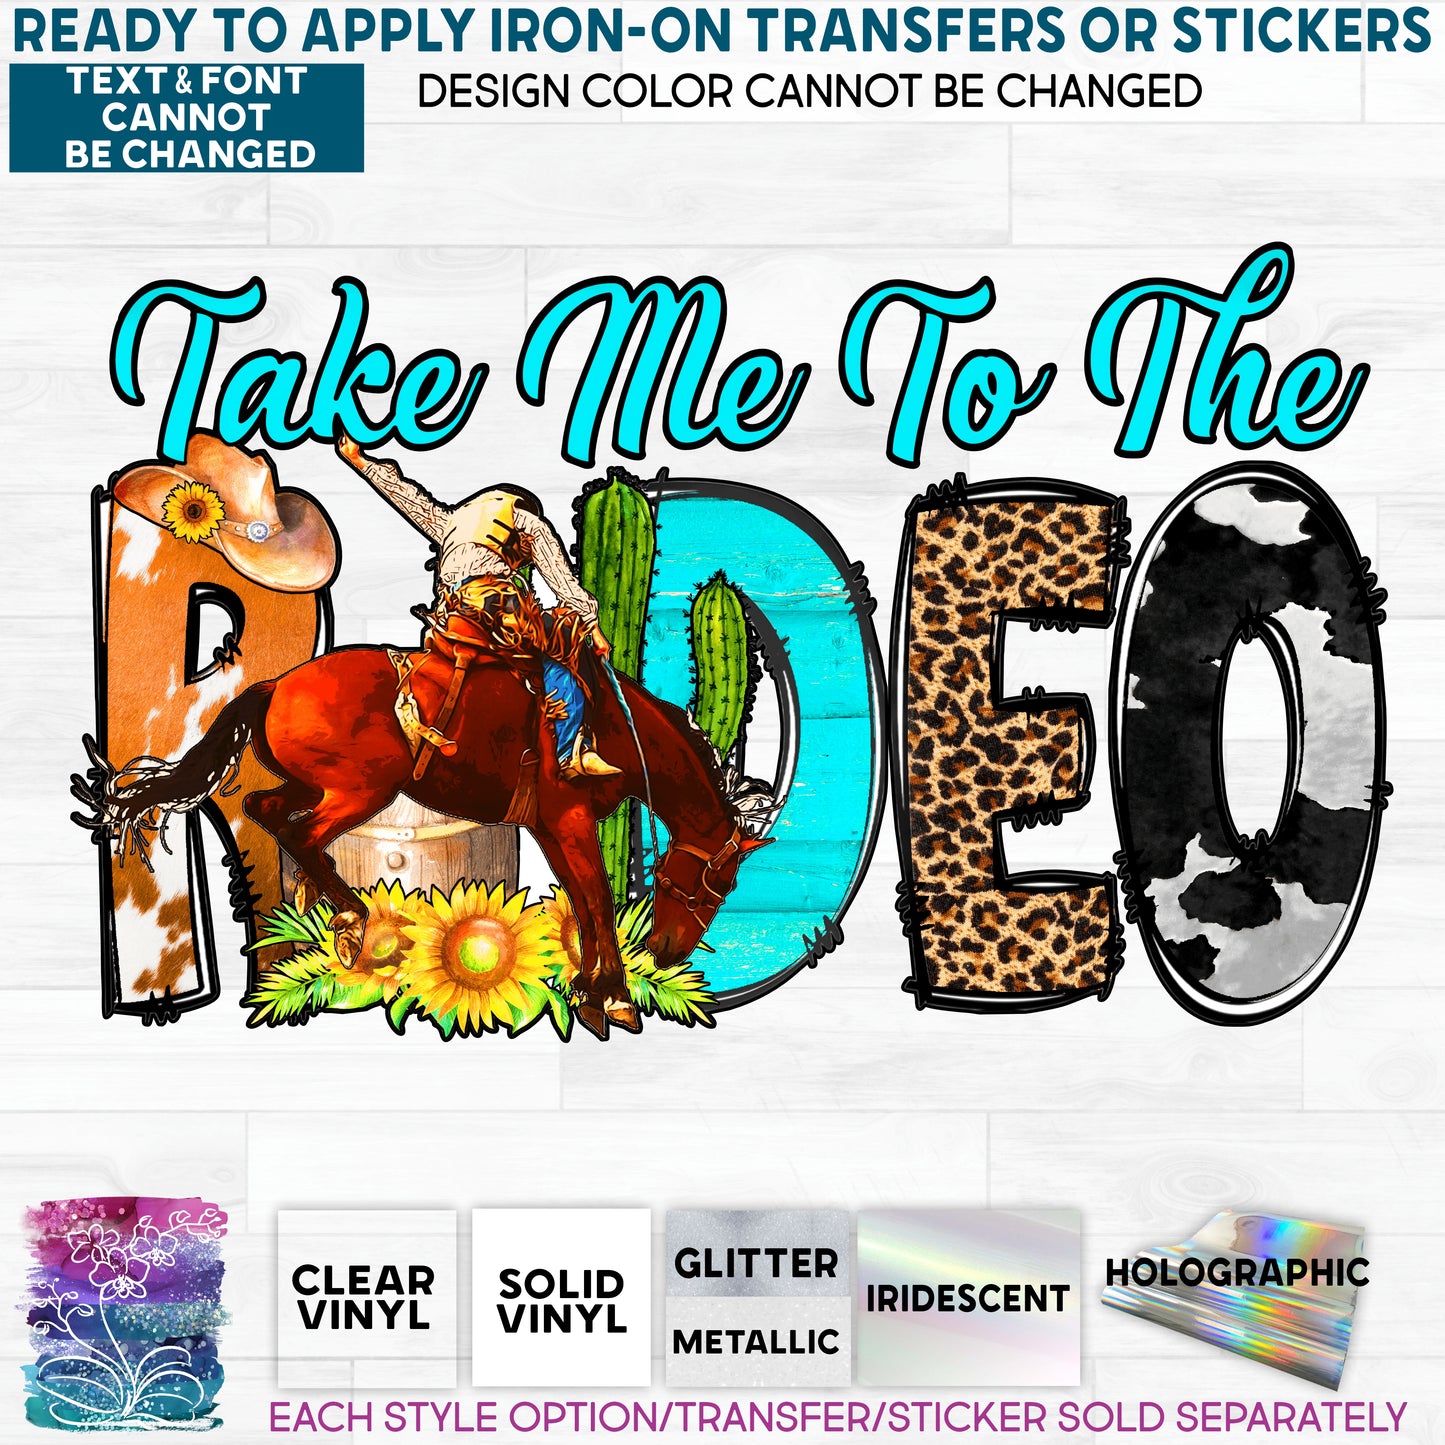 SBS-36-4D Take Me to the Rodeo Made-to-Order Iron-On Transfer or Sticker